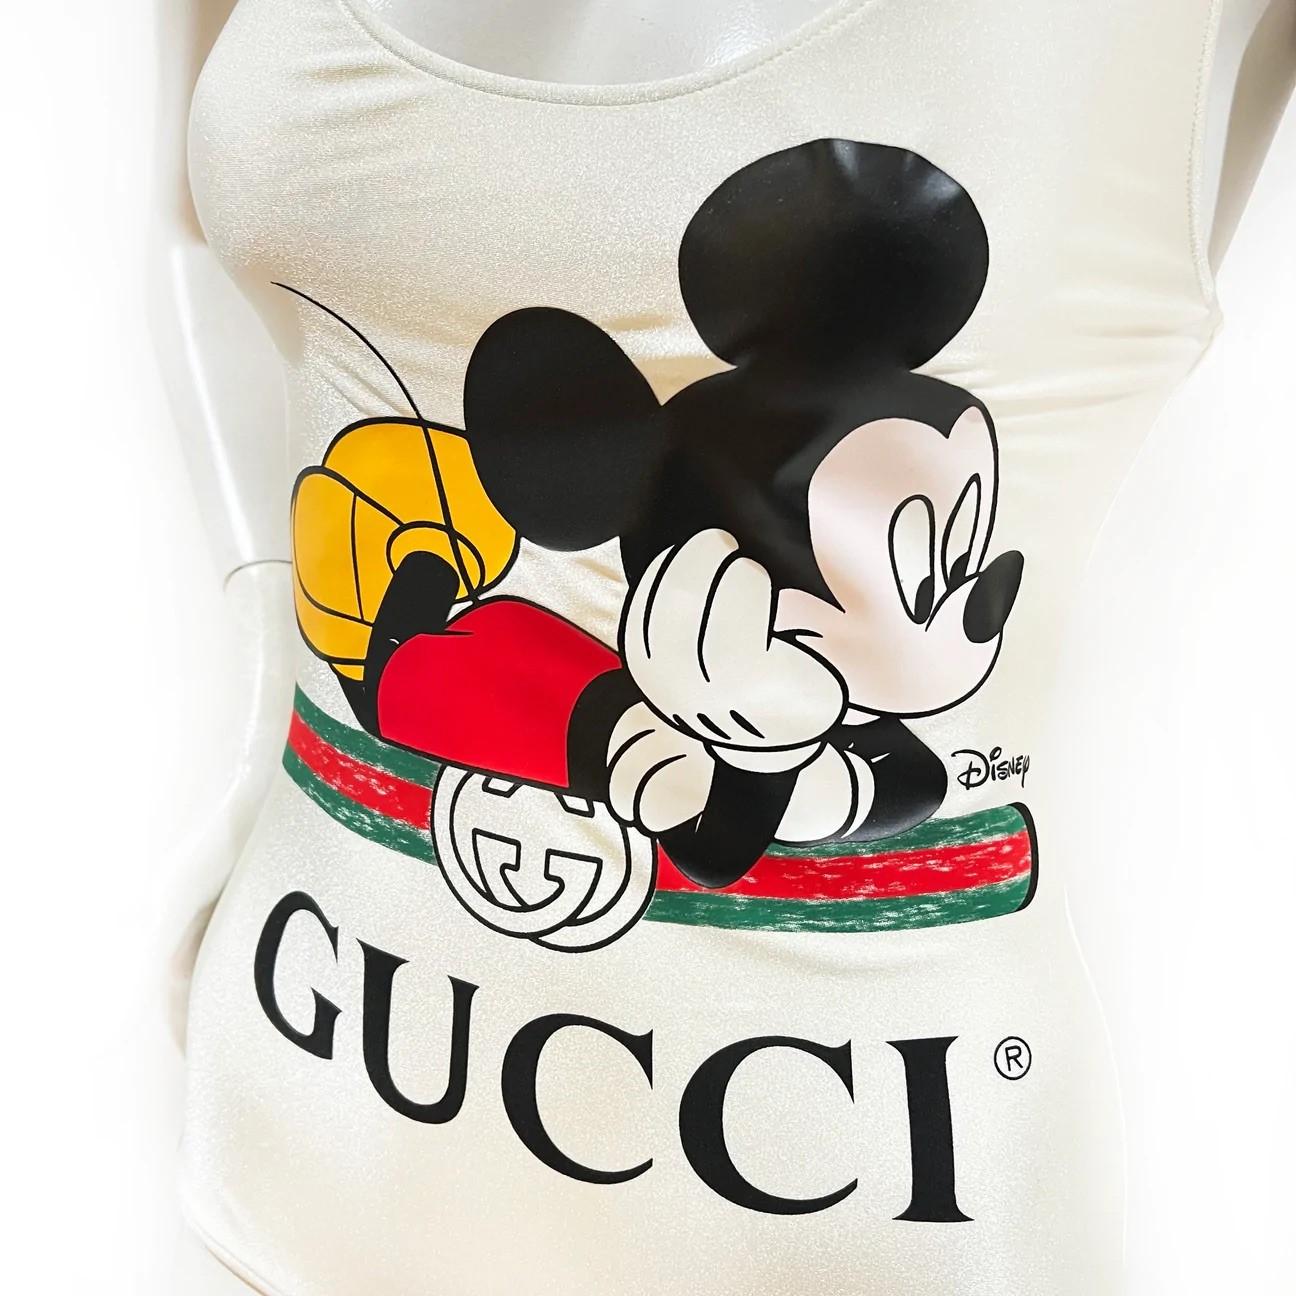 One-Piece Swimsuit by Disney X Gucci
Spring/Summer 2020
Made in Italy
Ivory 
Mickey Mouse Gucci logo graphic on front
Criss-cross back straps   
Fabric Composition; 80% polyamide, 20% elastane
New With Tags (still includes protective